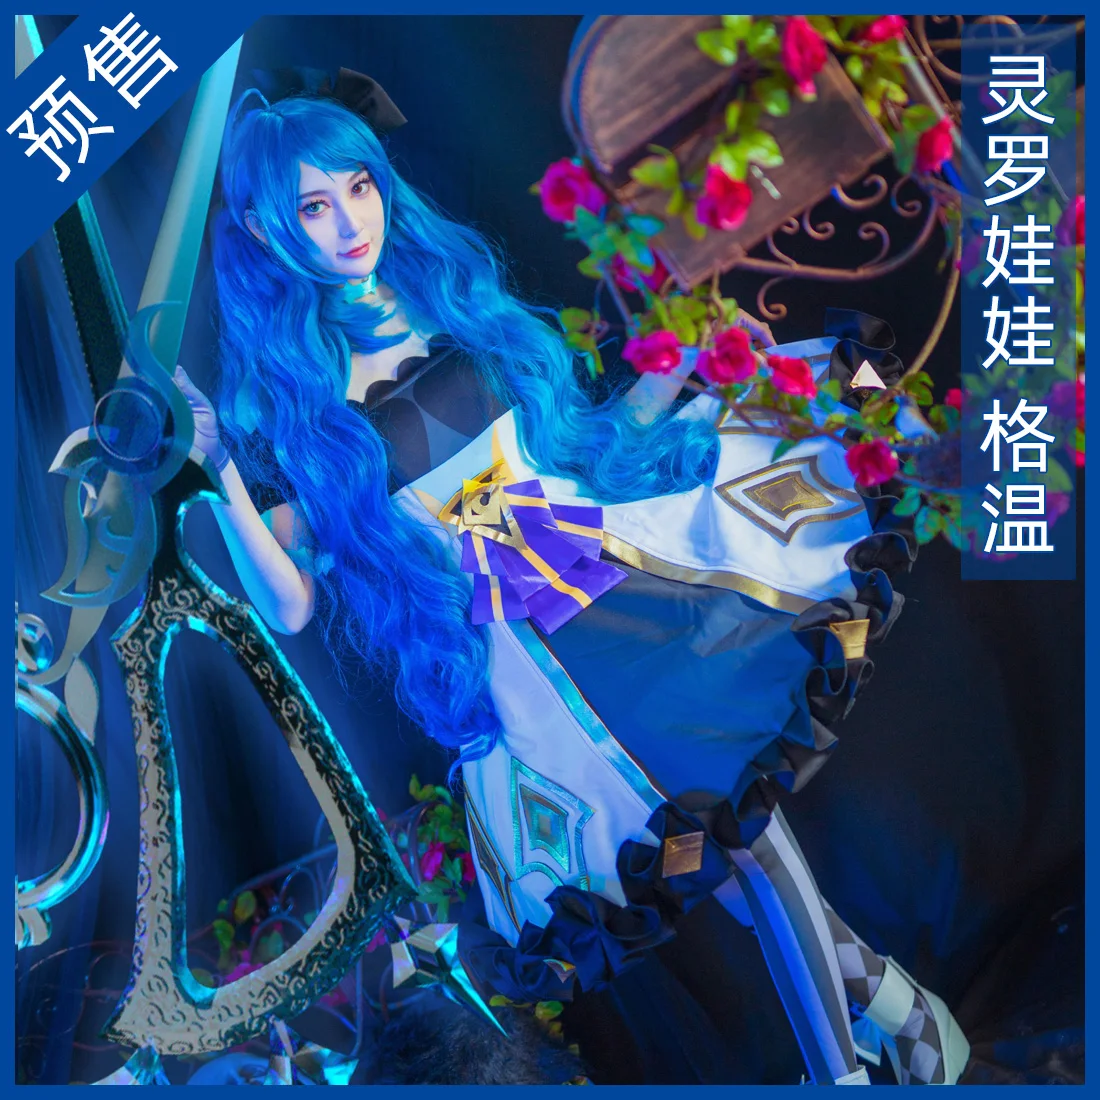 

Hot Game LOL Cosplay New Hero Gwen Costume Lolita Maid Dress League Of Legends Suit Party Halloween Clothing Role Play Anime